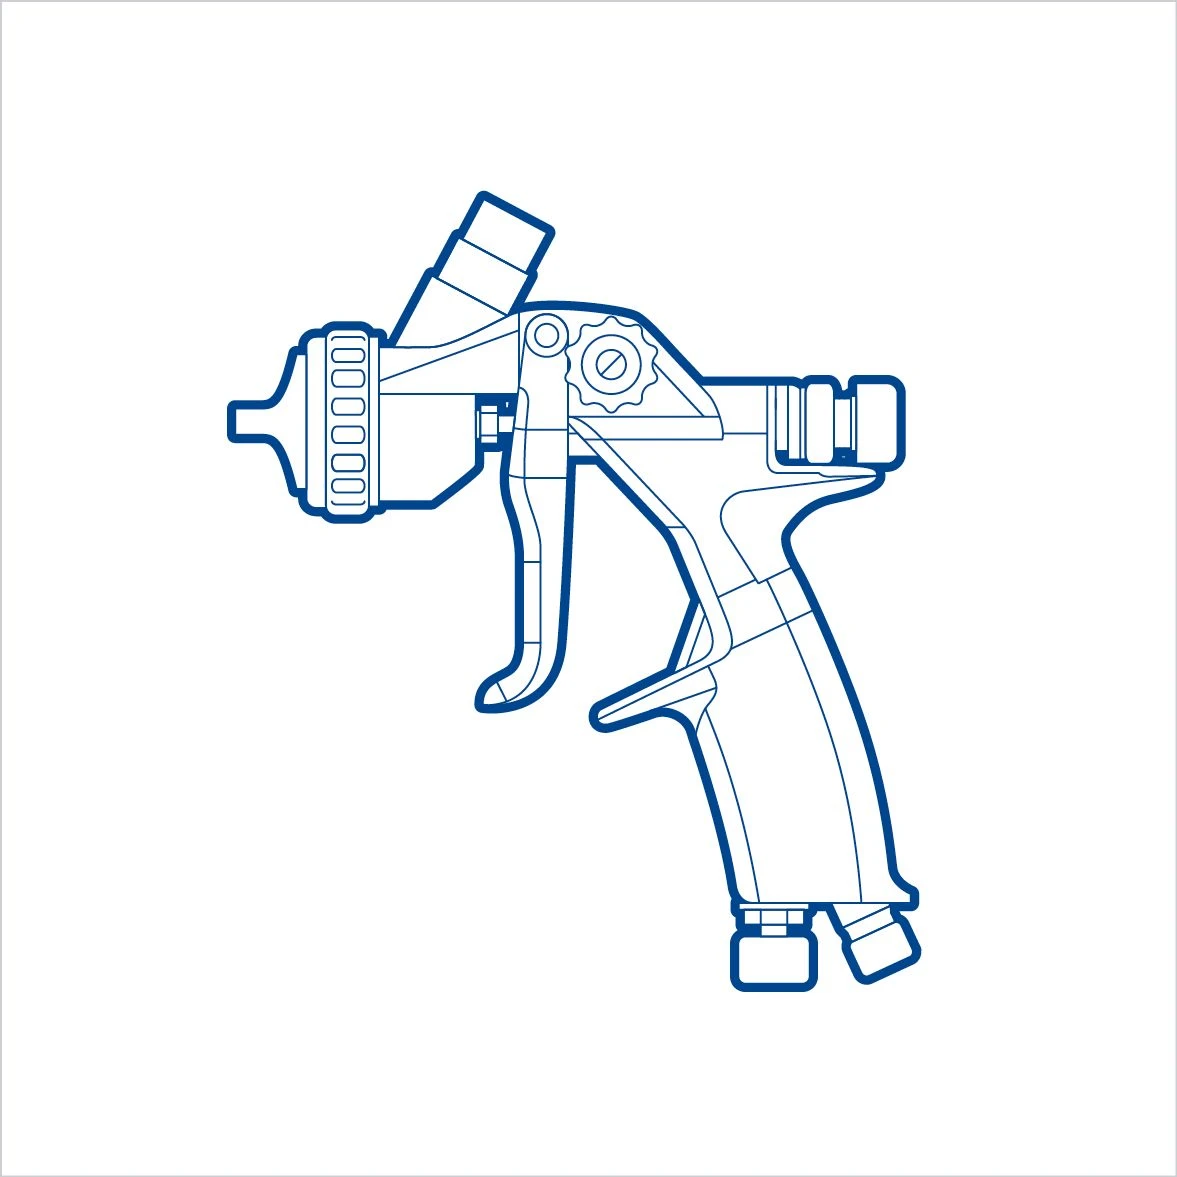 Graphic of cspray gun for infographics